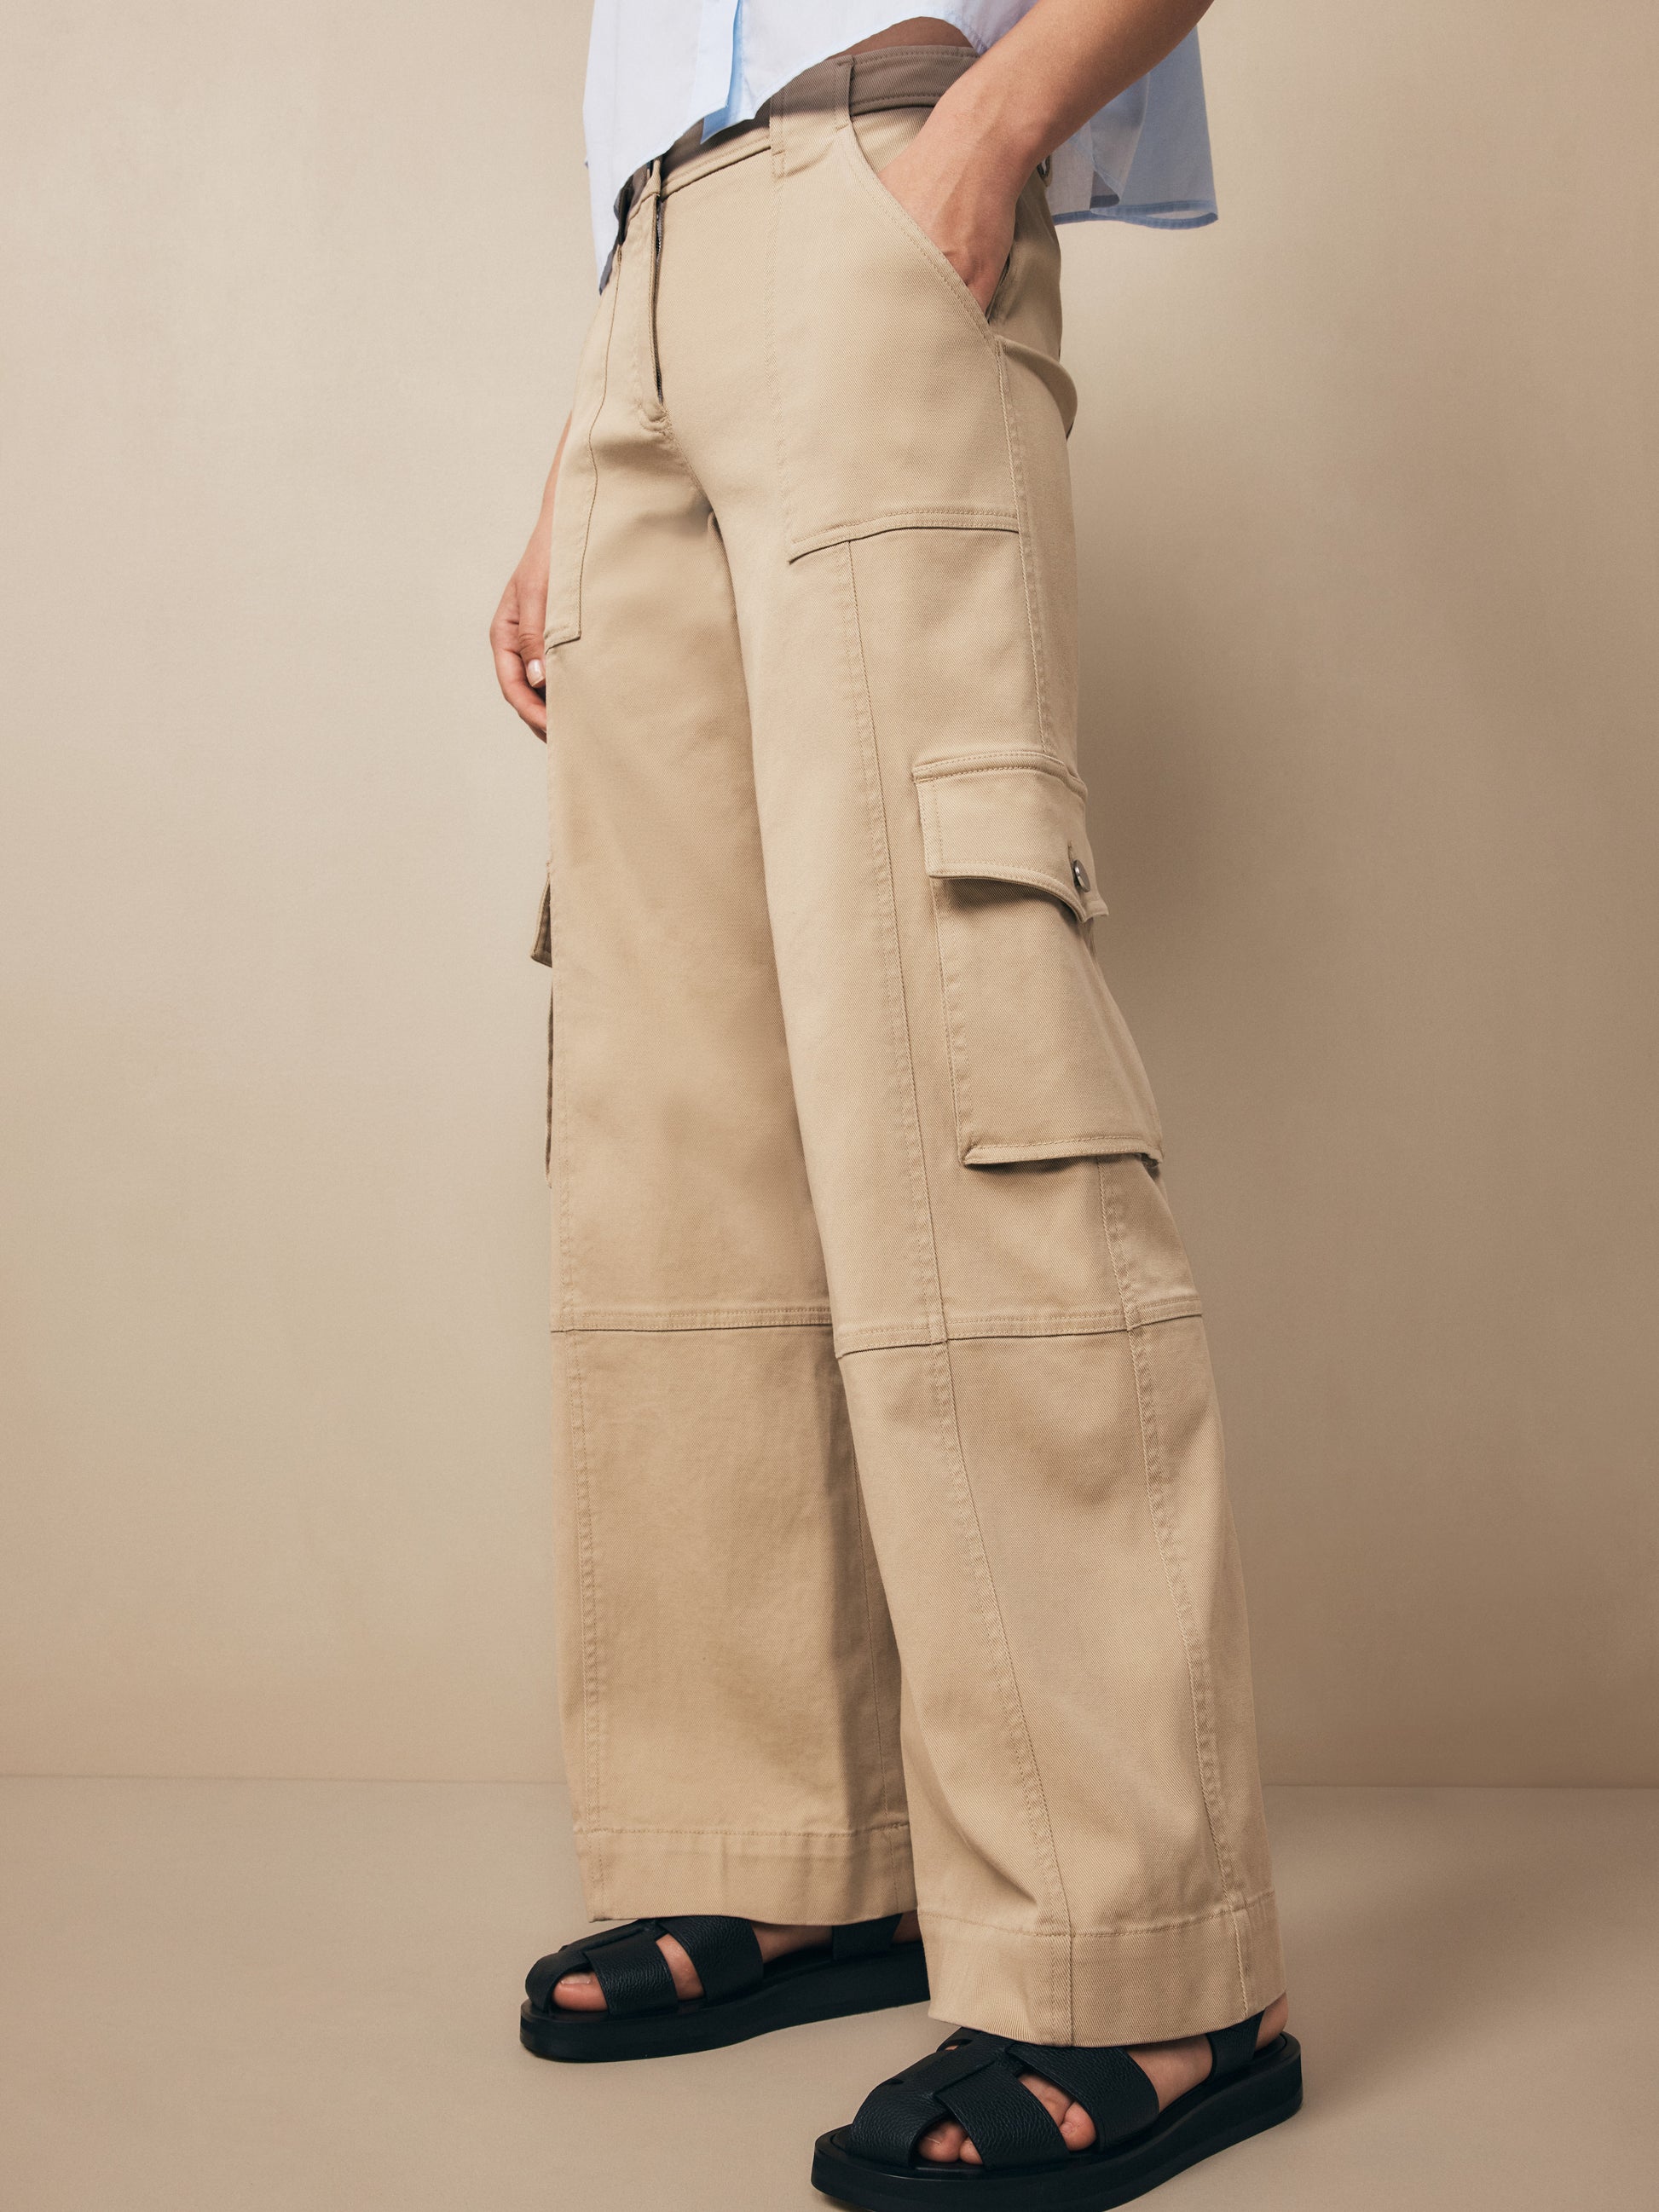 TWP Khaki Coop Pant with Cargo Pockets in Cotton Twill view 1